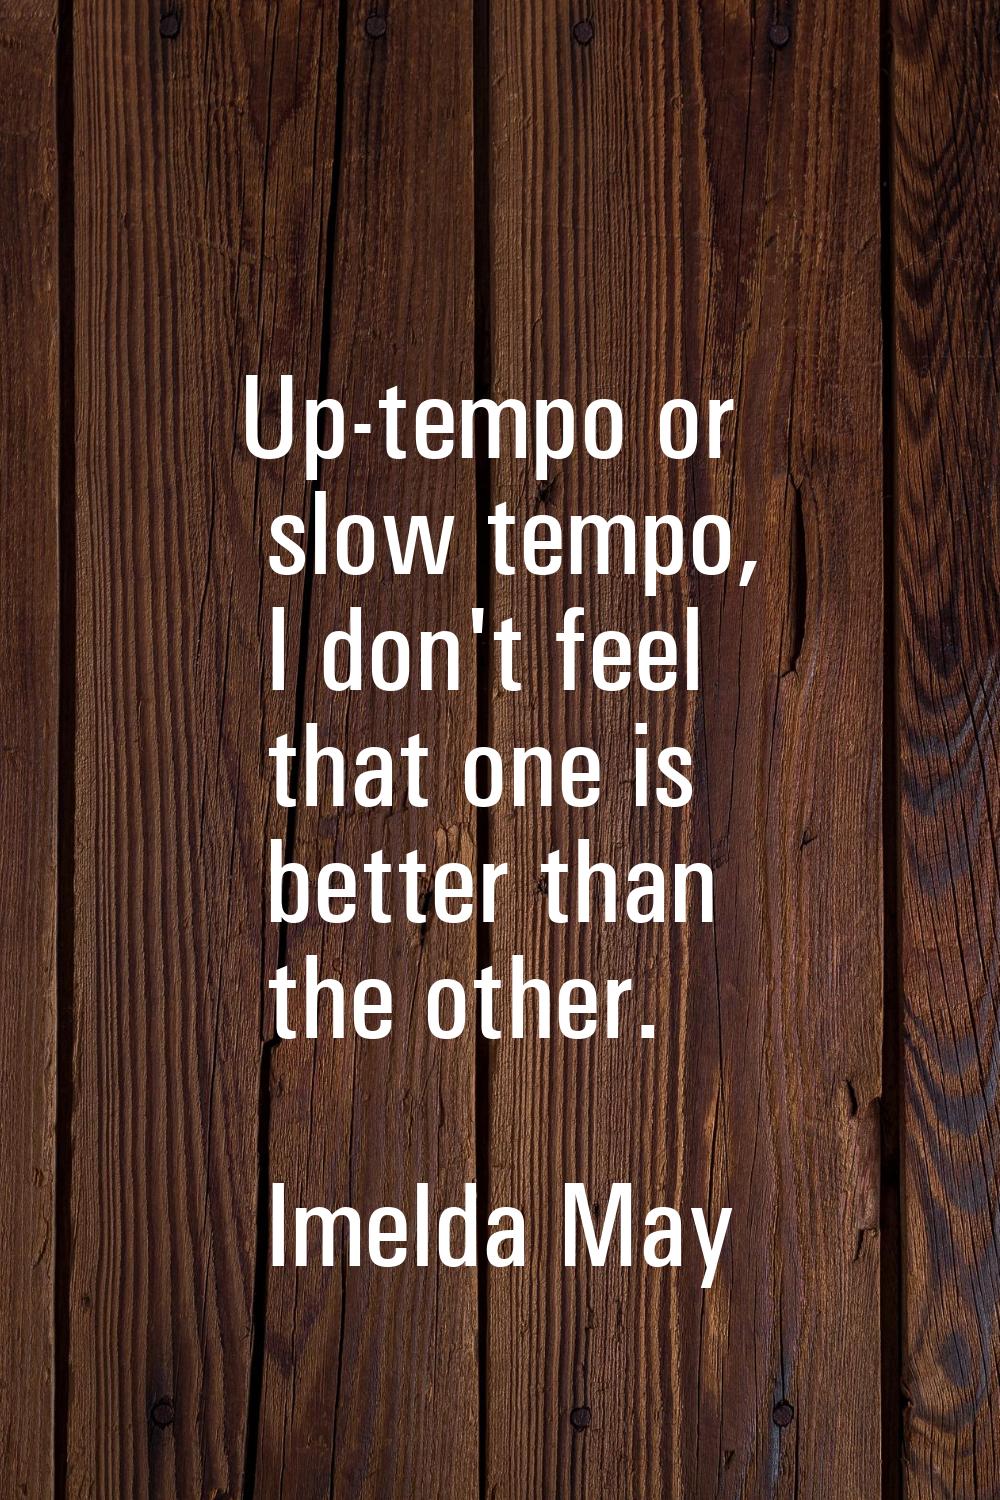 Up-tempo or slow tempo, I don't feel that one is better than the other.